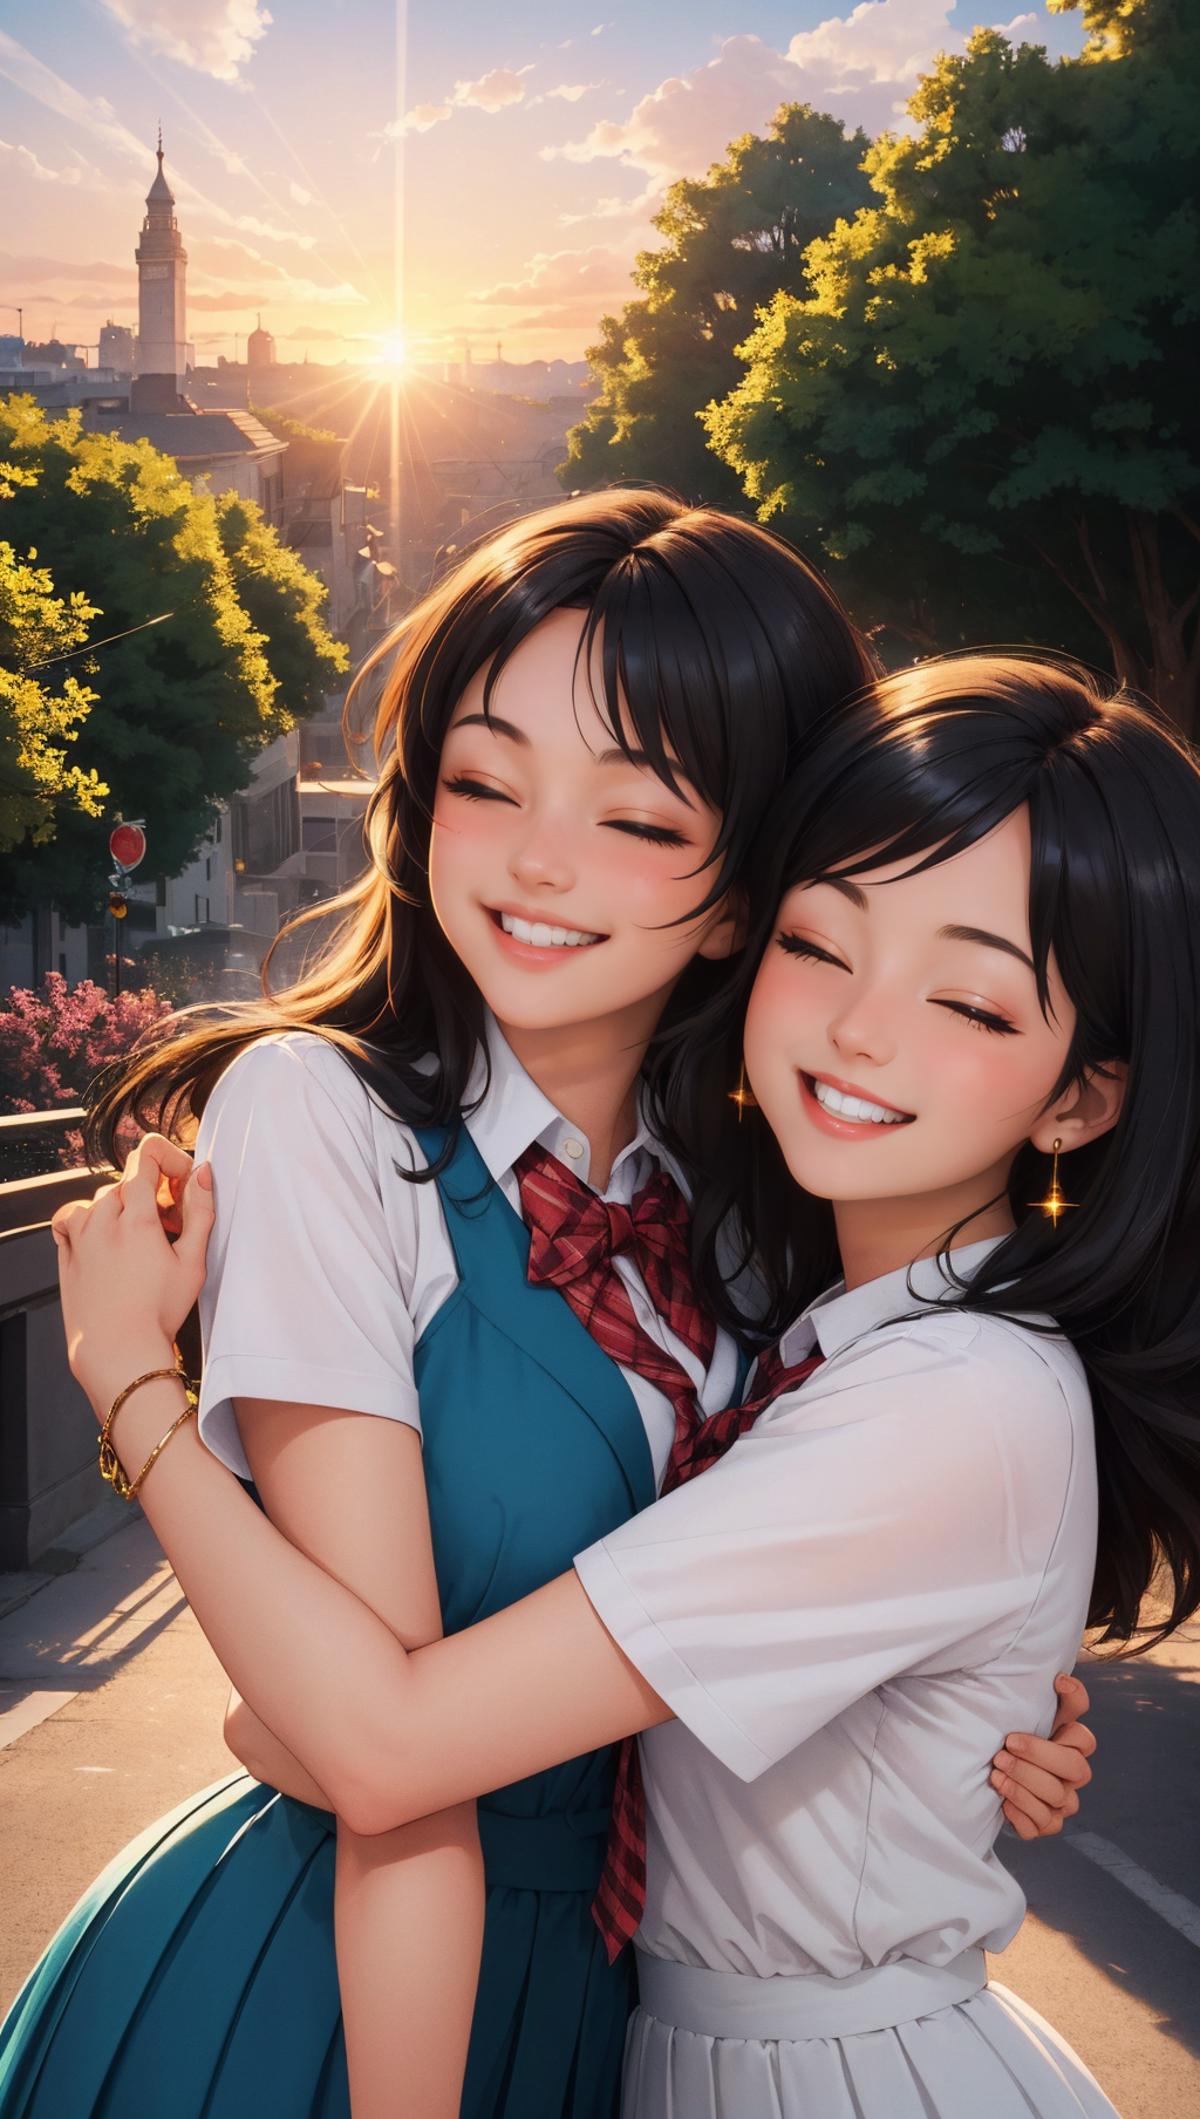 Two cartoon girls hugging with a sunny background.